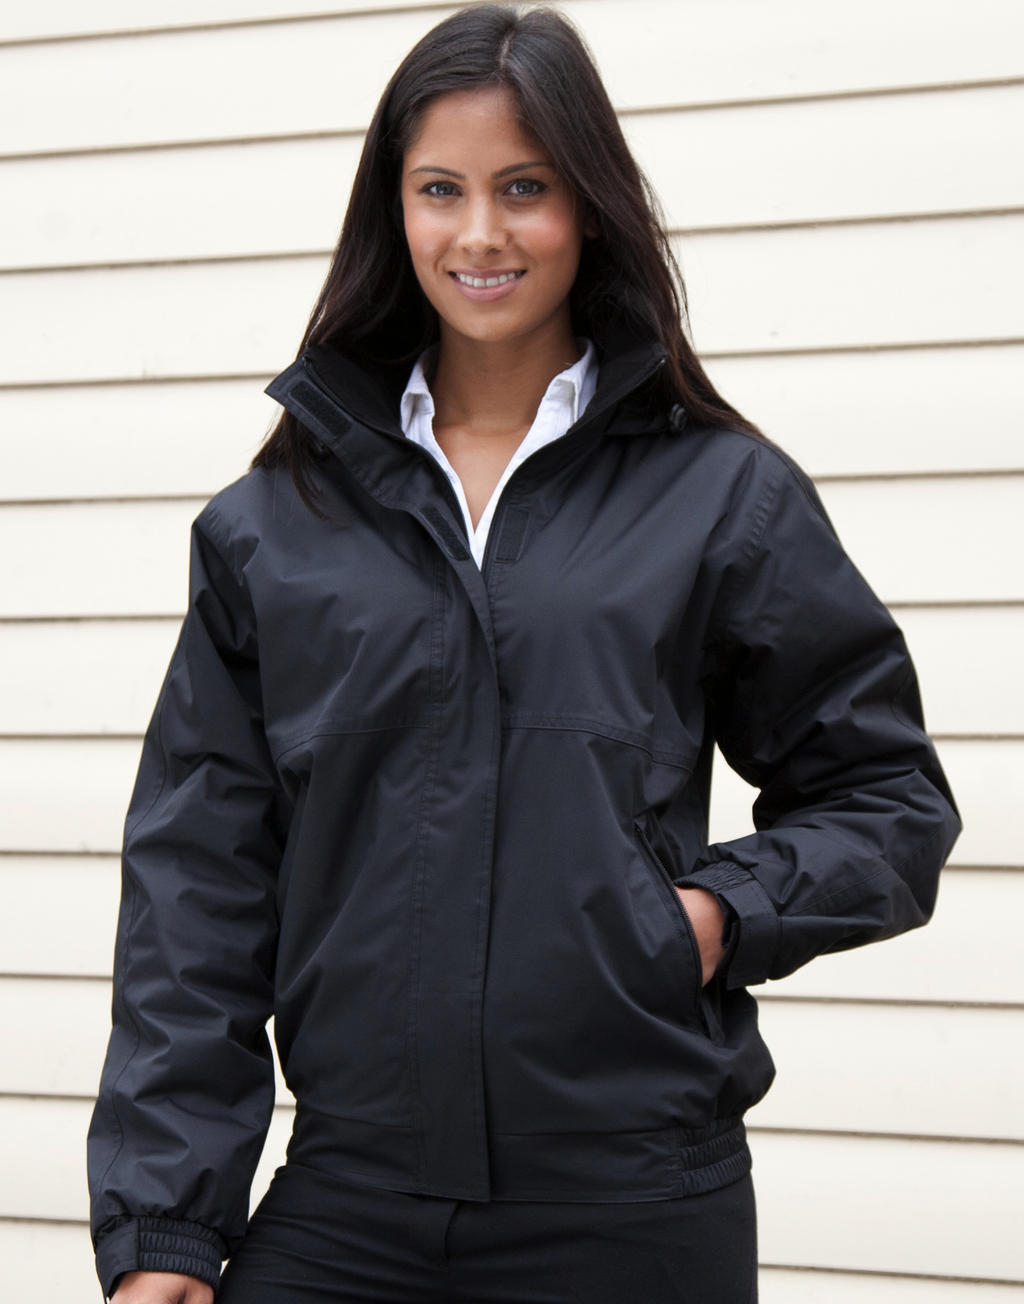  Ladies Channel Jacket in Farbe Black